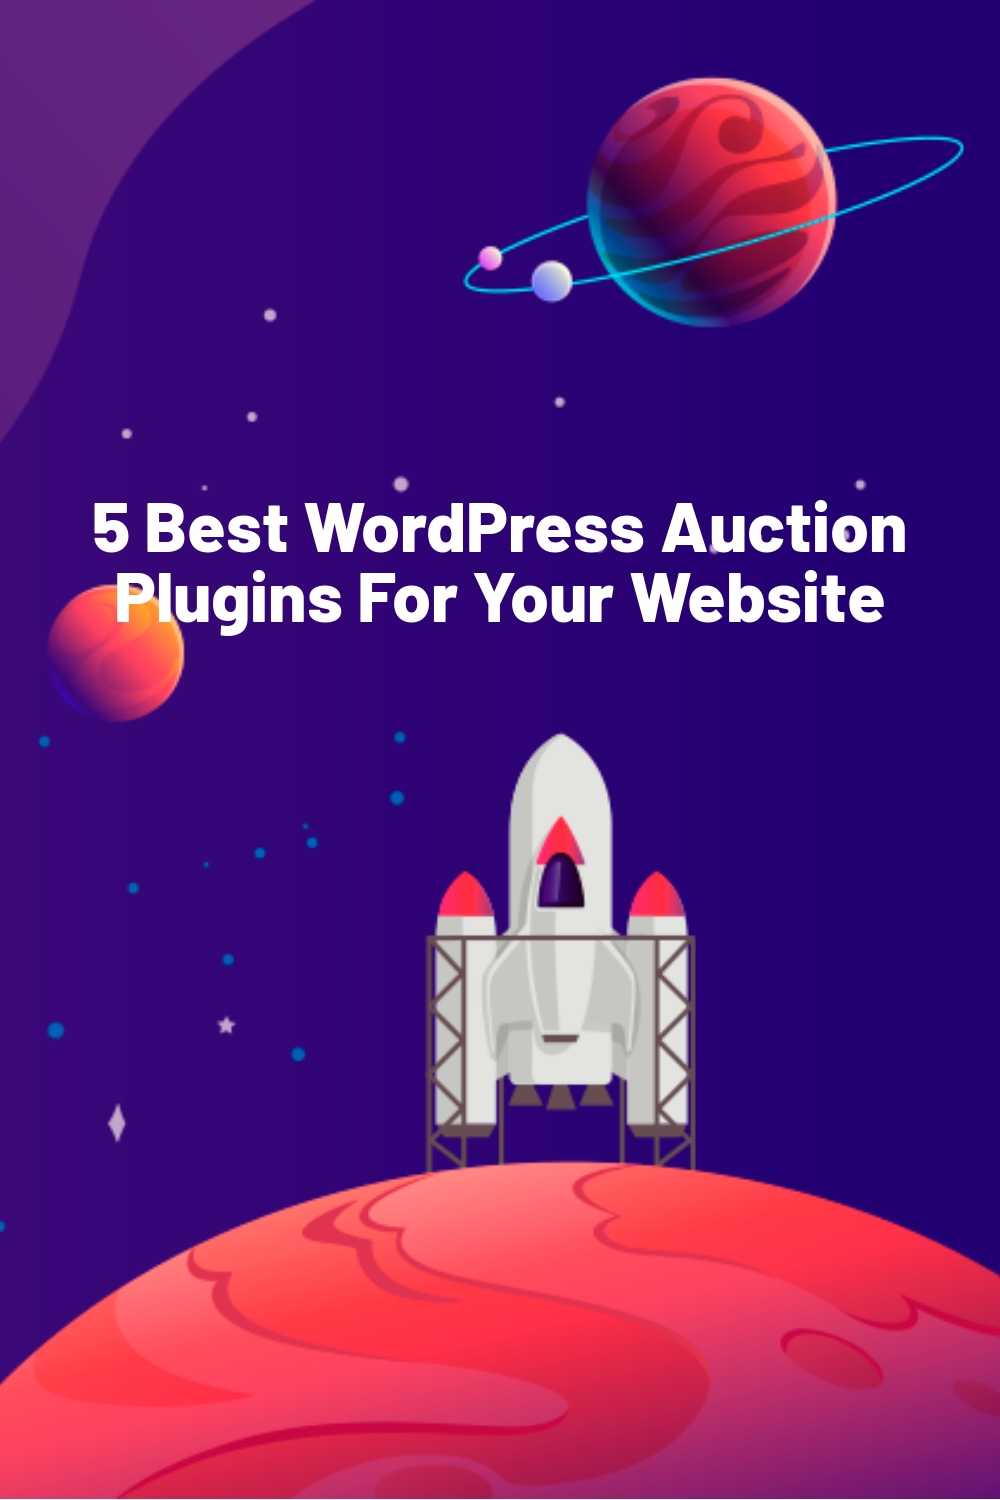 5 Best WordPress Auction Plugins For Your Website